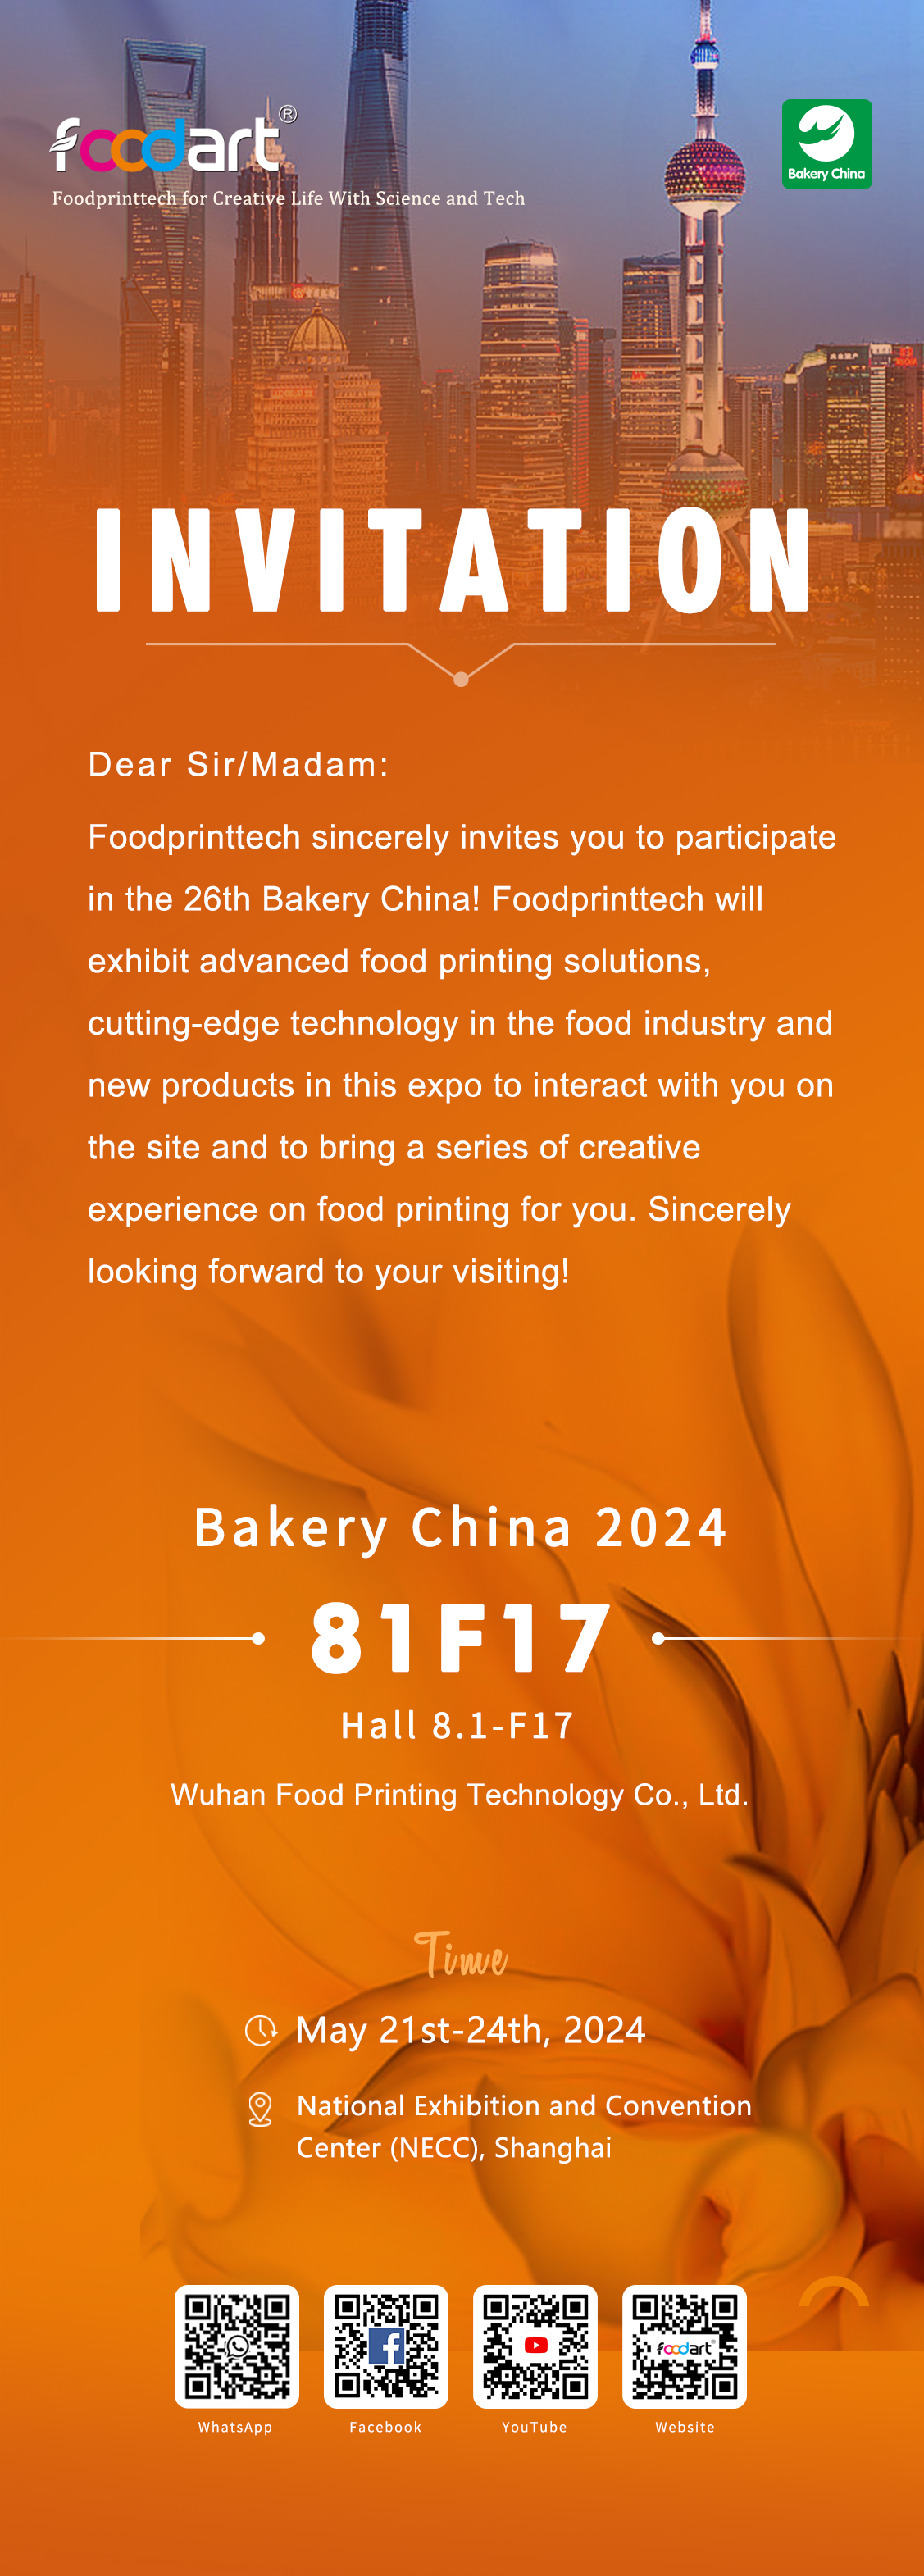 Invitation for The 26th Bakery China on May 21st-24th, 2024